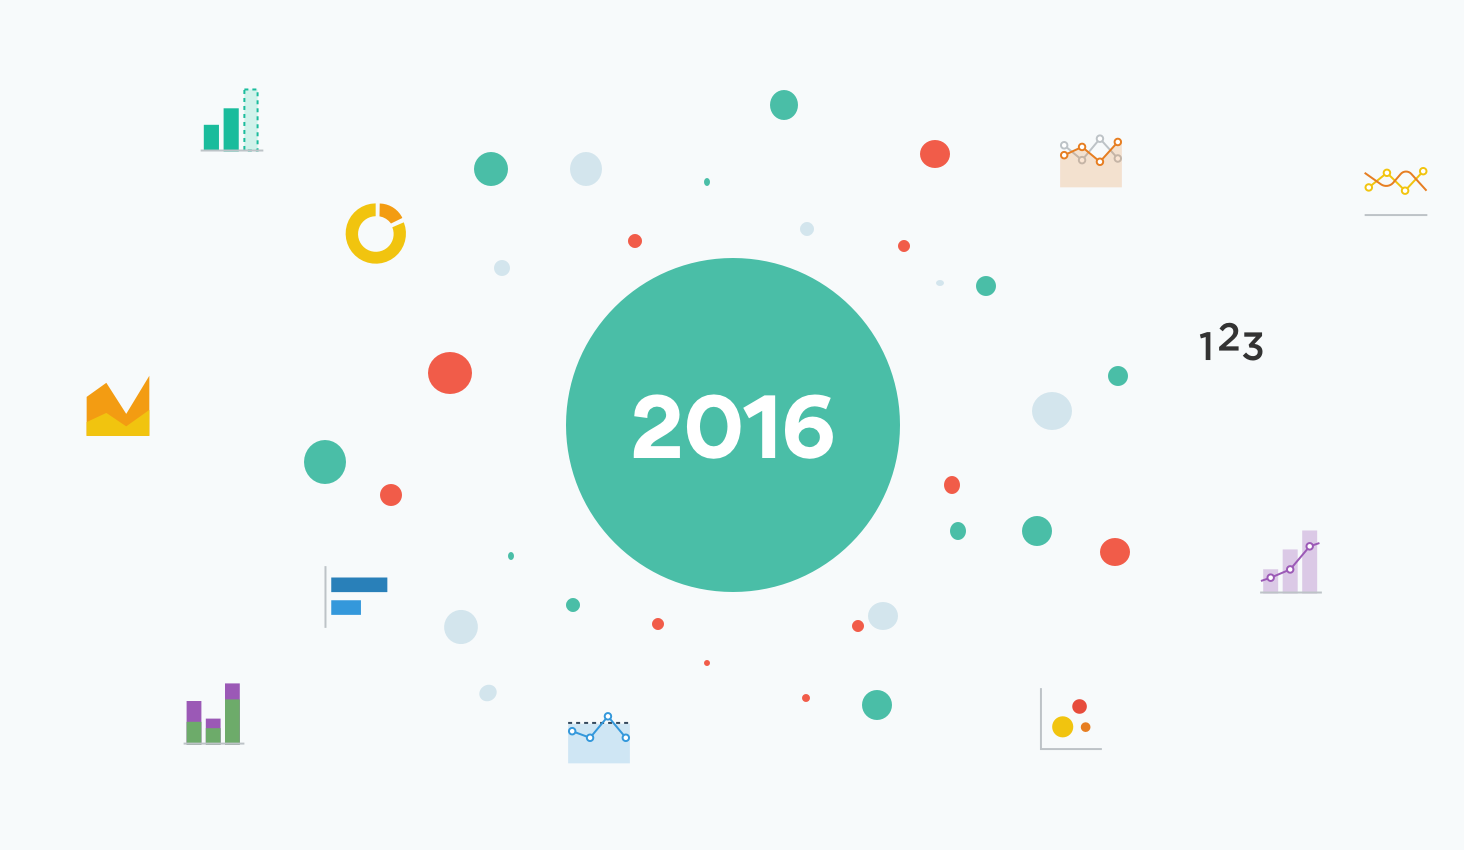 Make 2016 your best year yet @2x